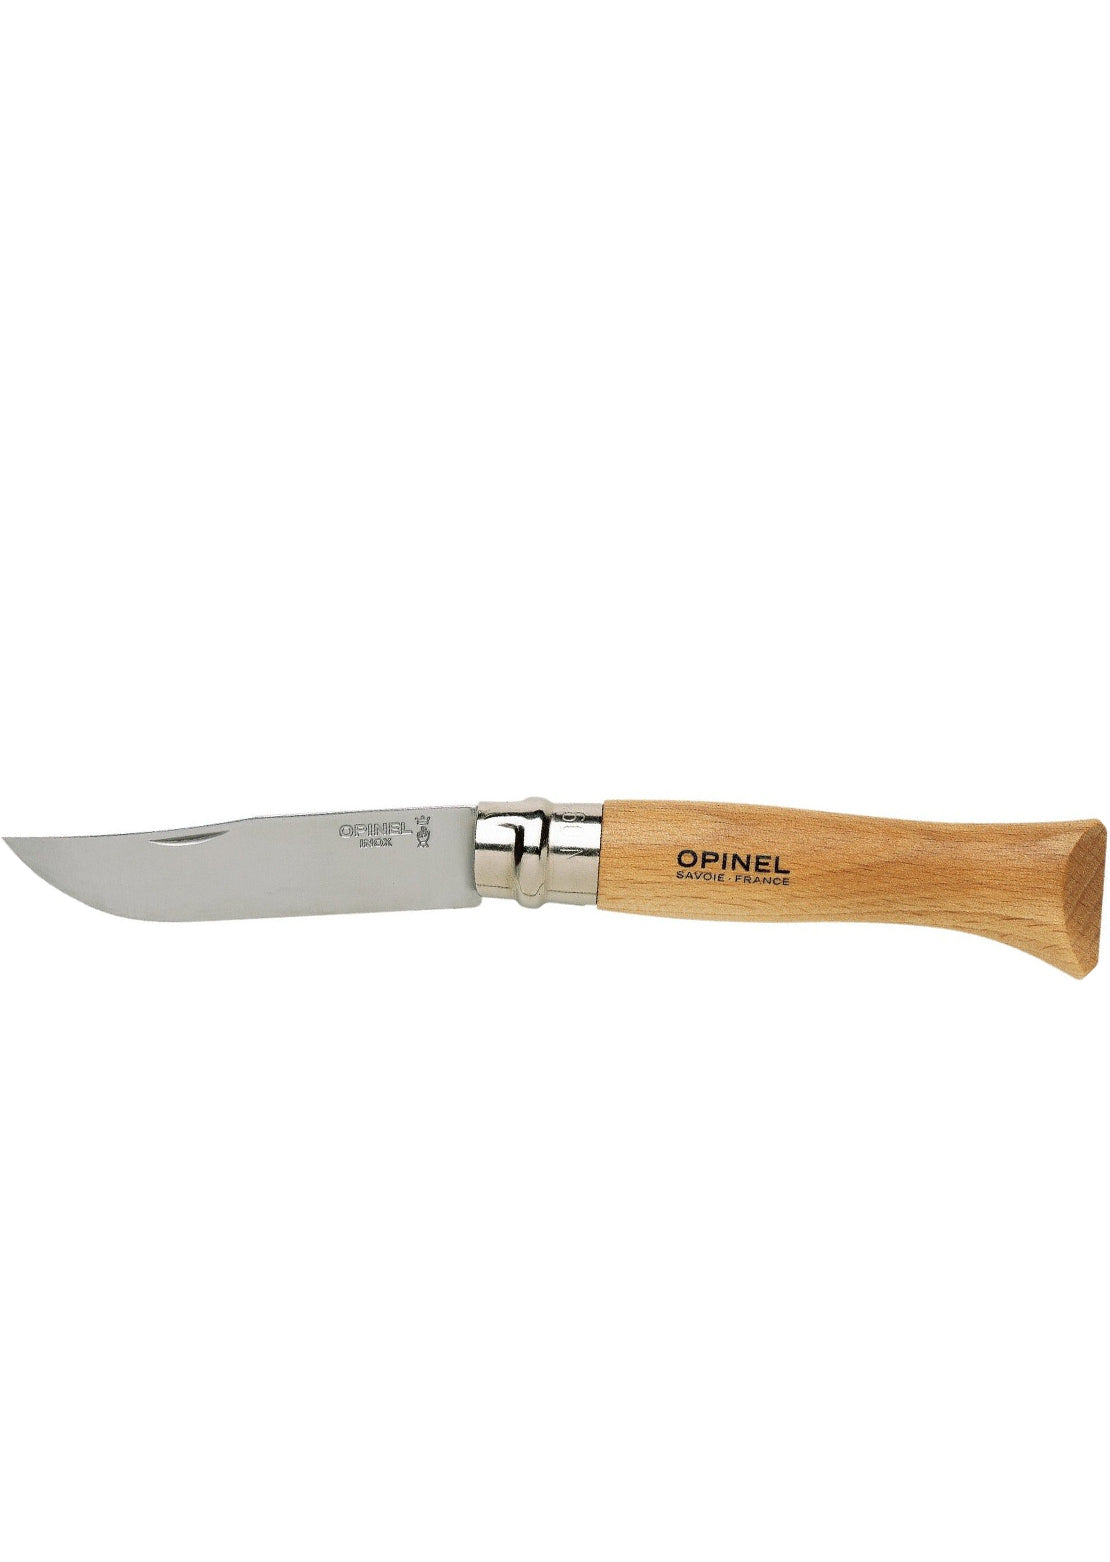 Opinel Tradition N°09 Classic Stainless Steel Knife Beech Wood